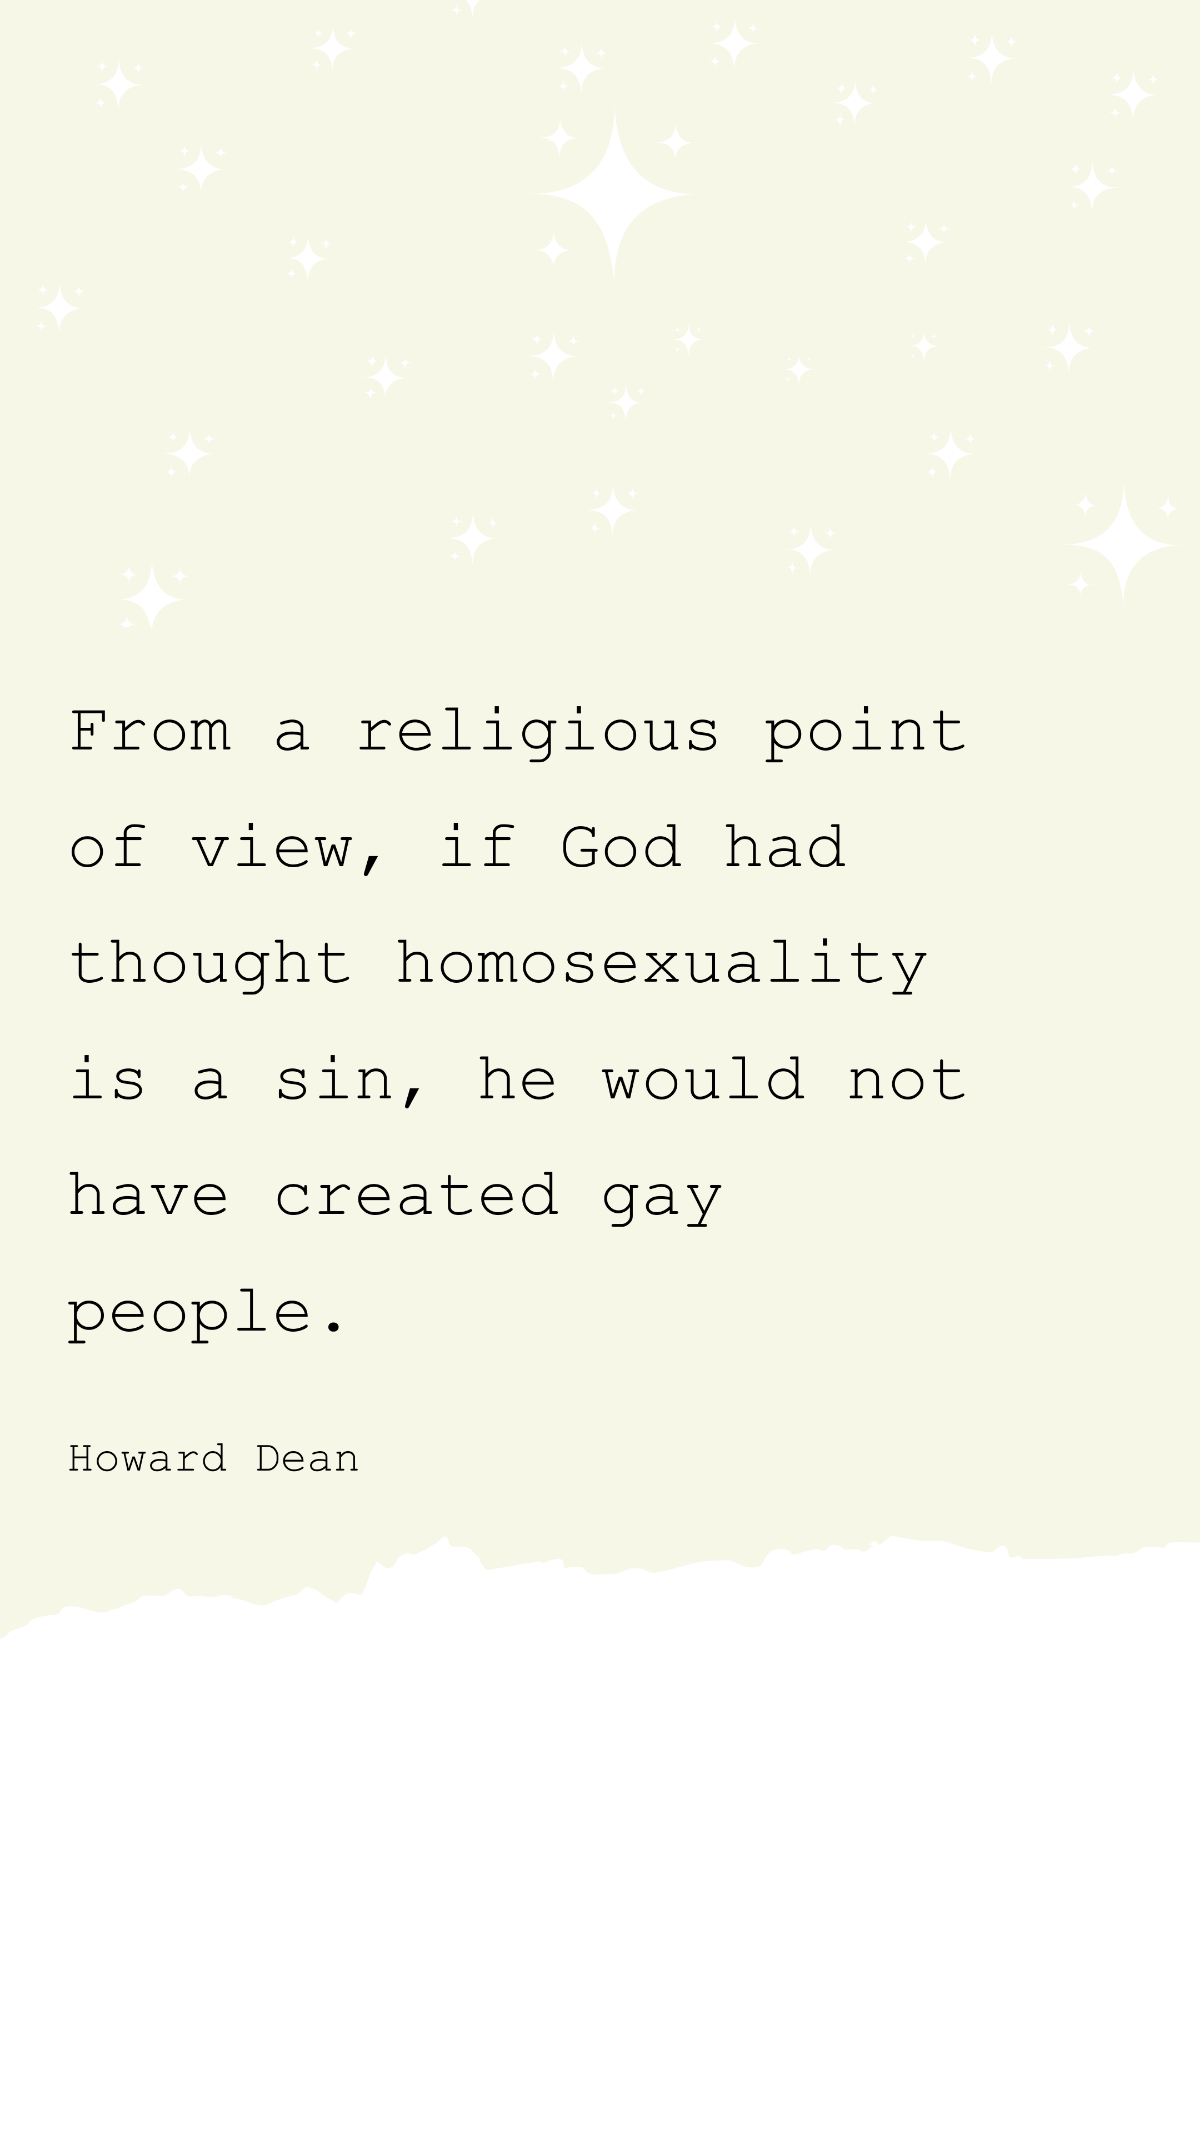 Howard Dean - From a religious point of view, if God had thought homosexuality is a sin, he would not have created gay people. Template